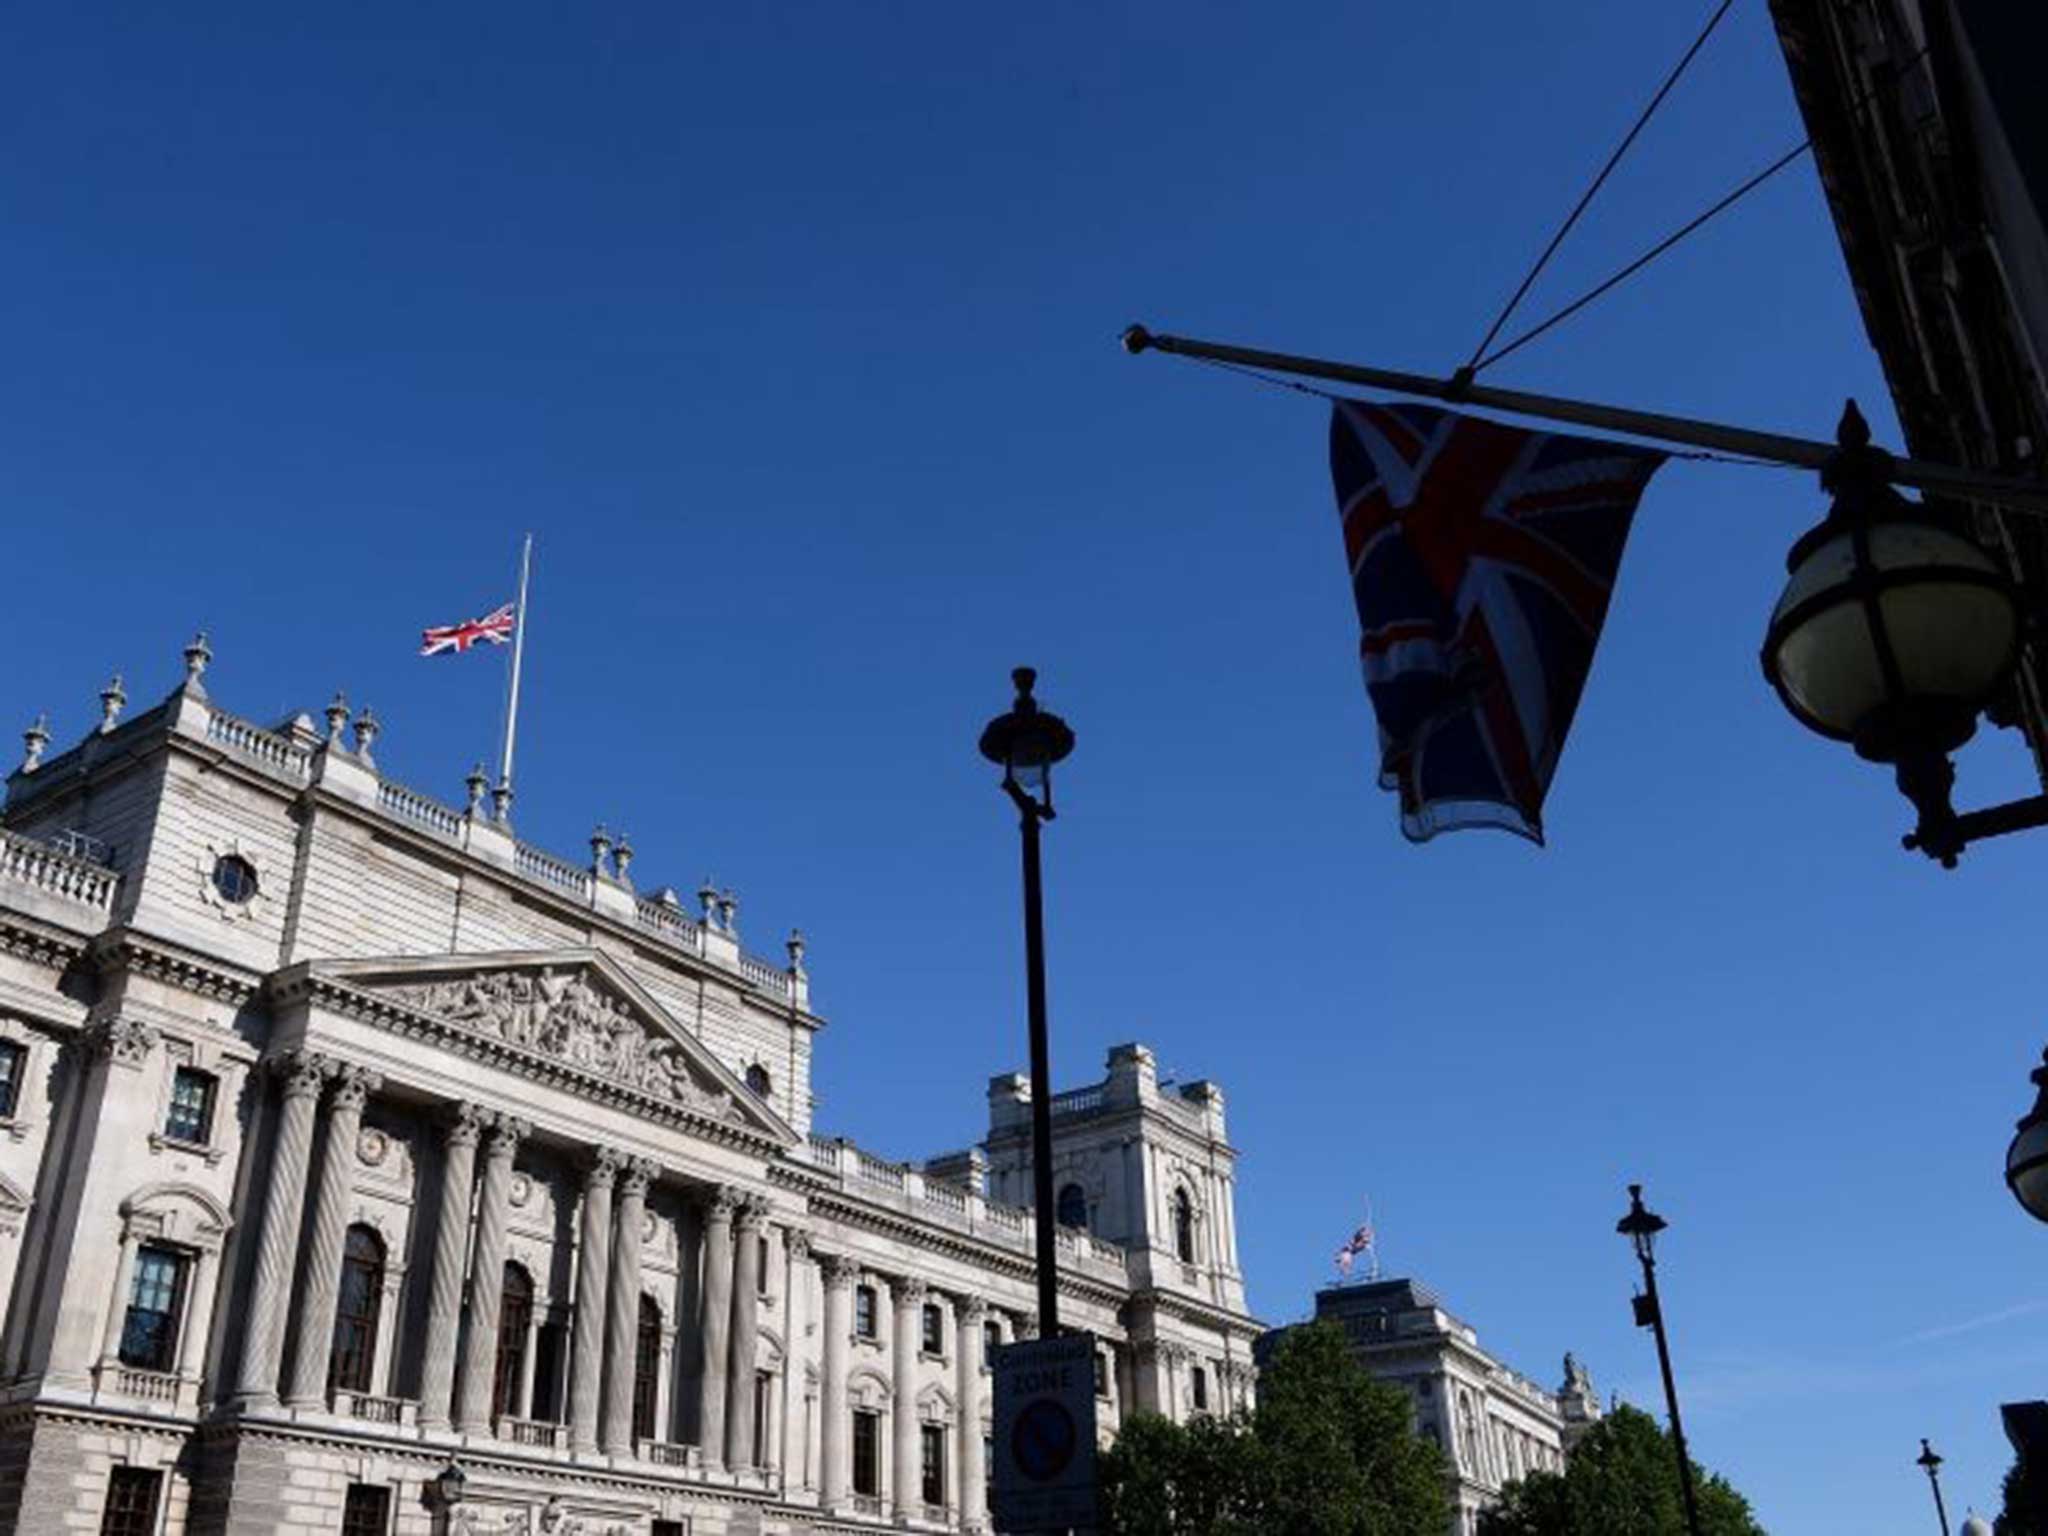 Flags are flown at half mast over Whitehall in memory of the 38 people who died on 2 June